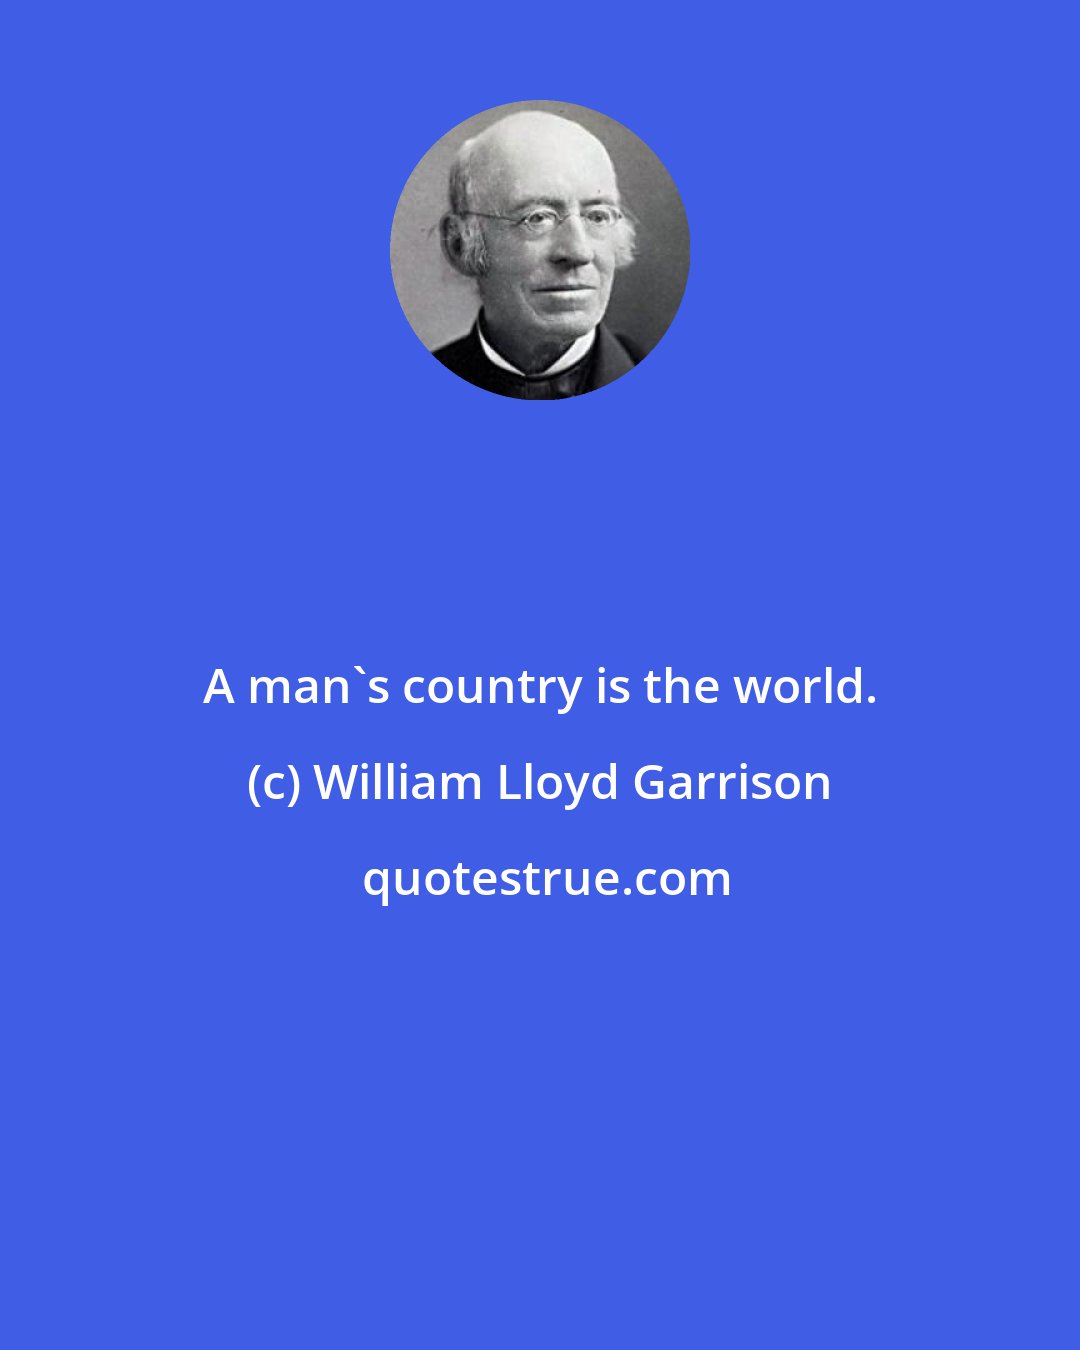 William Lloyd Garrison: A man's country is the world.